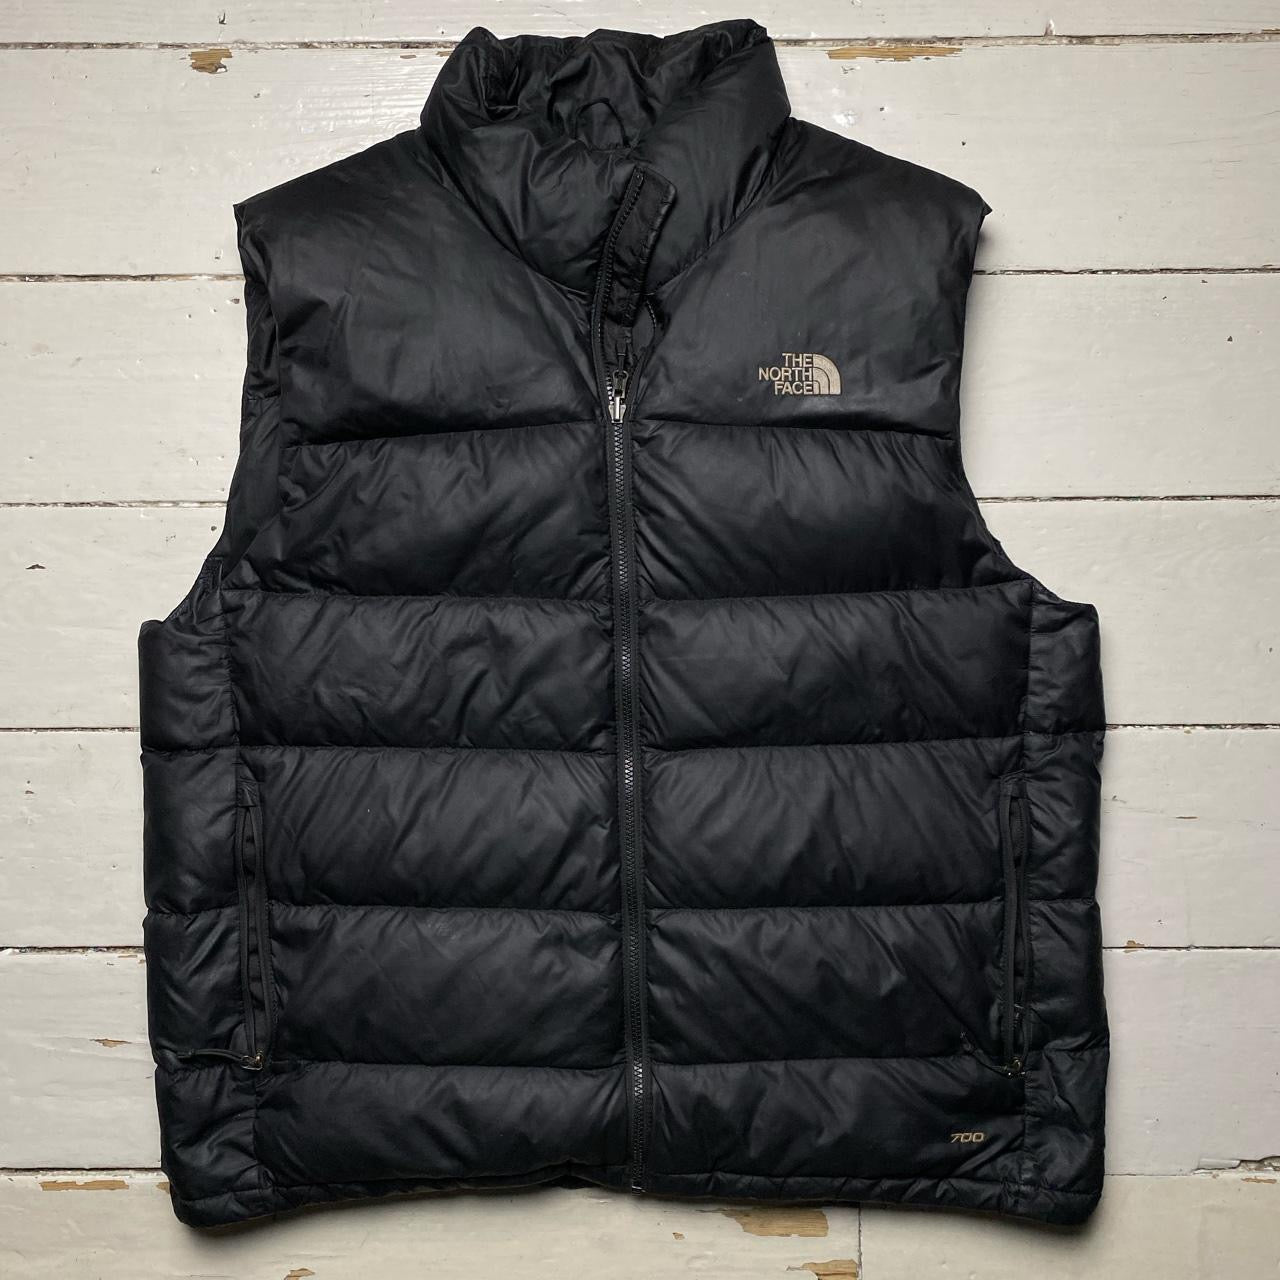 The North Face Gilet 700 Series (XL)